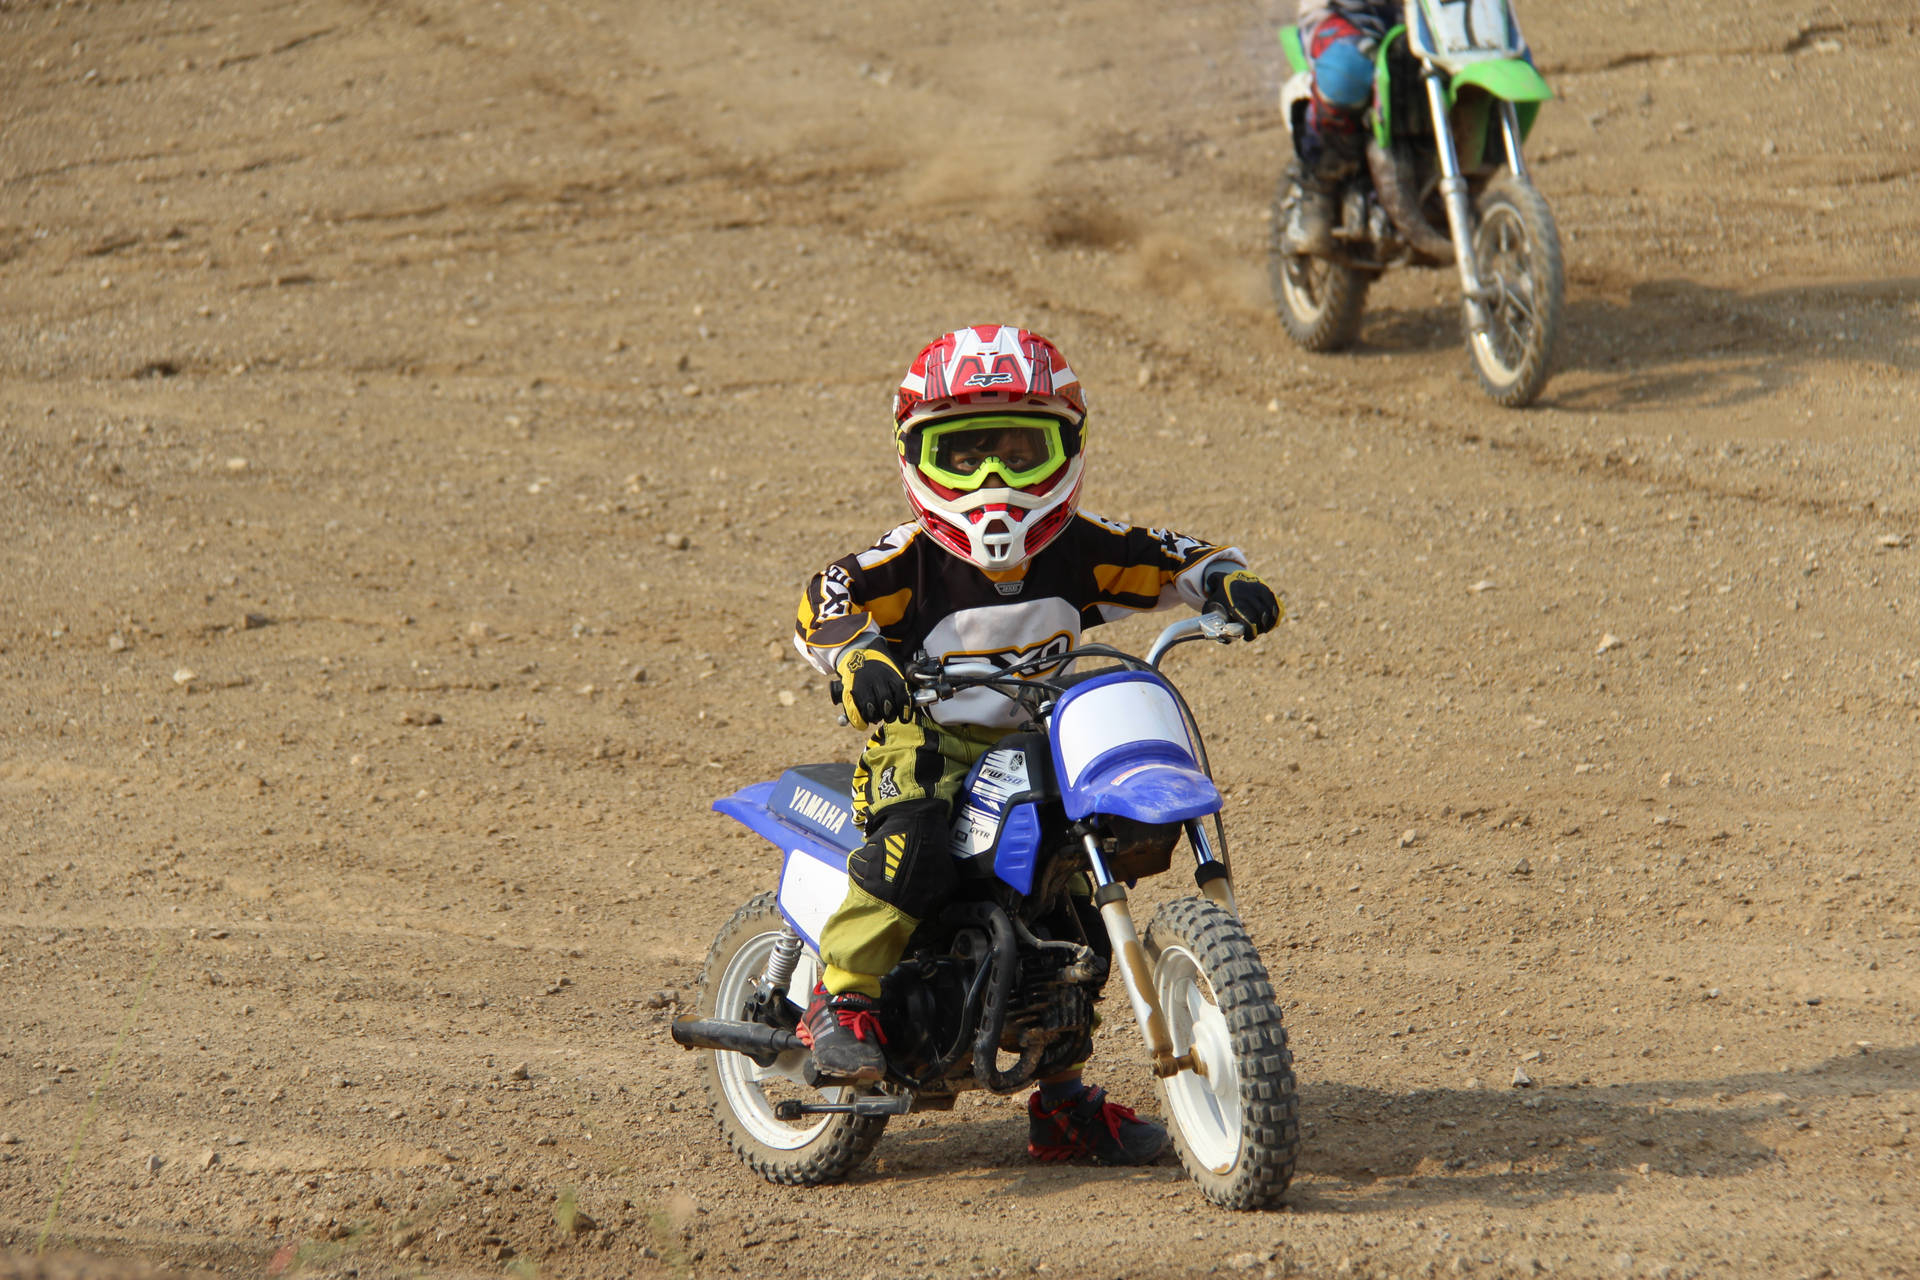 Young Racer At Motocross Racing Background